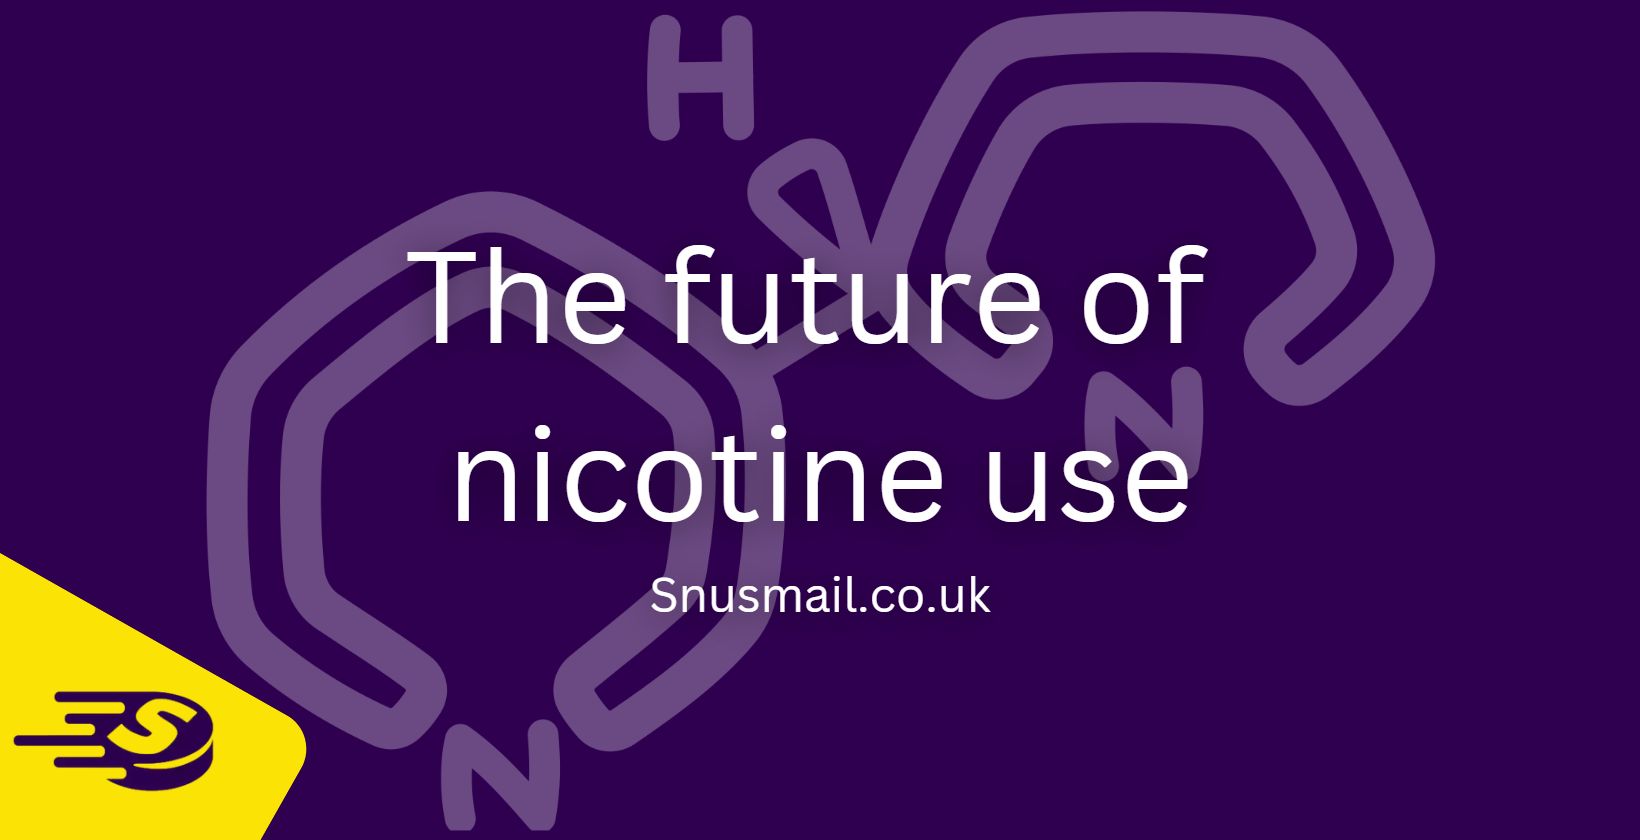 The future of nicotine use - Snusmail.co.uk